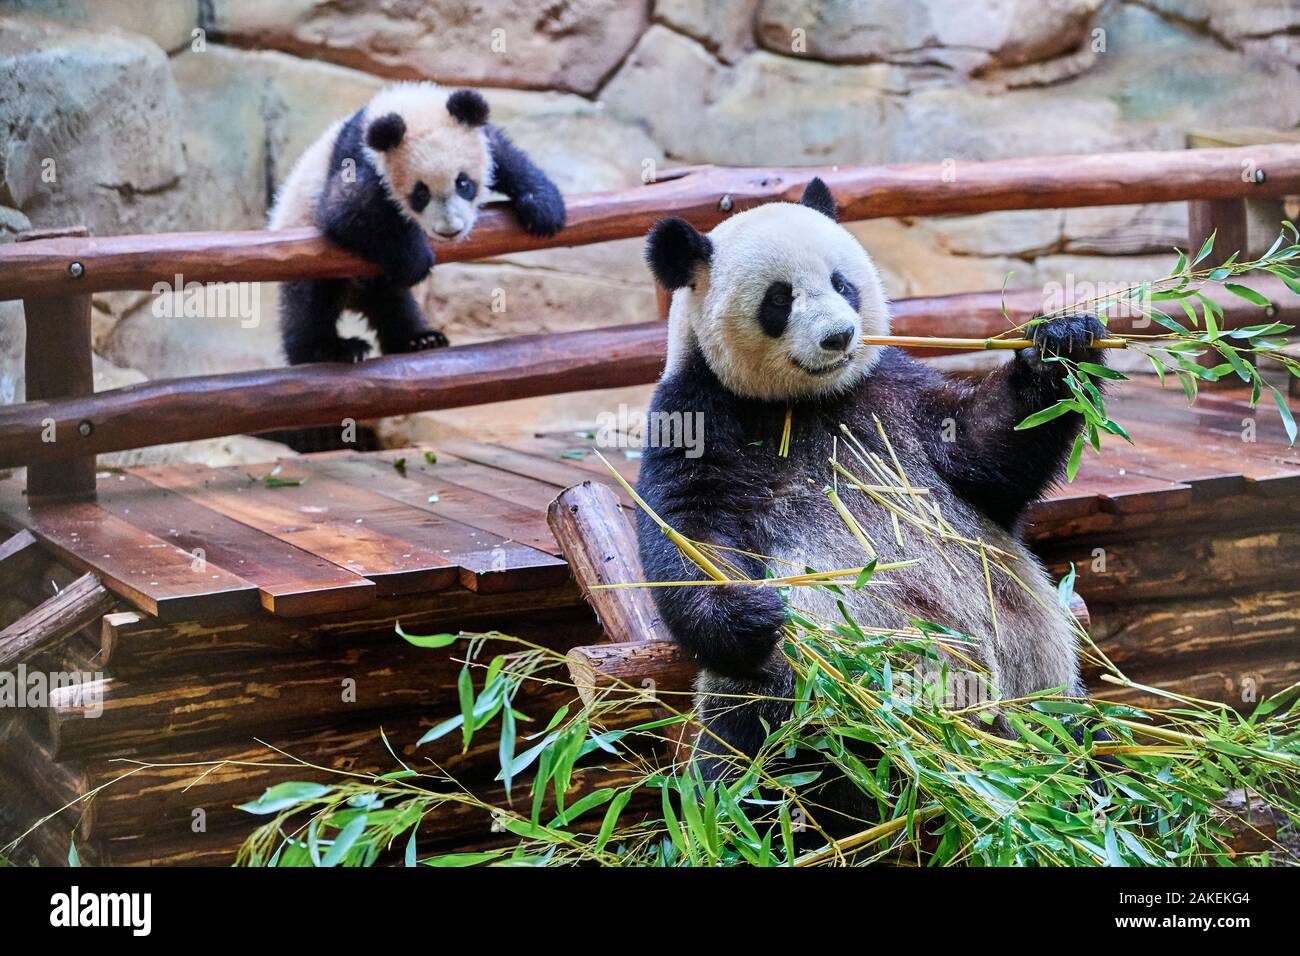 Giant panda (Ailuropoda melanoleuca) female Huan Huan feeding on bamboo with her playful cub in the background Yuan Meng, first Giant panda even born in France, now aged 8 months, Beauval Zoo, France Stock Photo